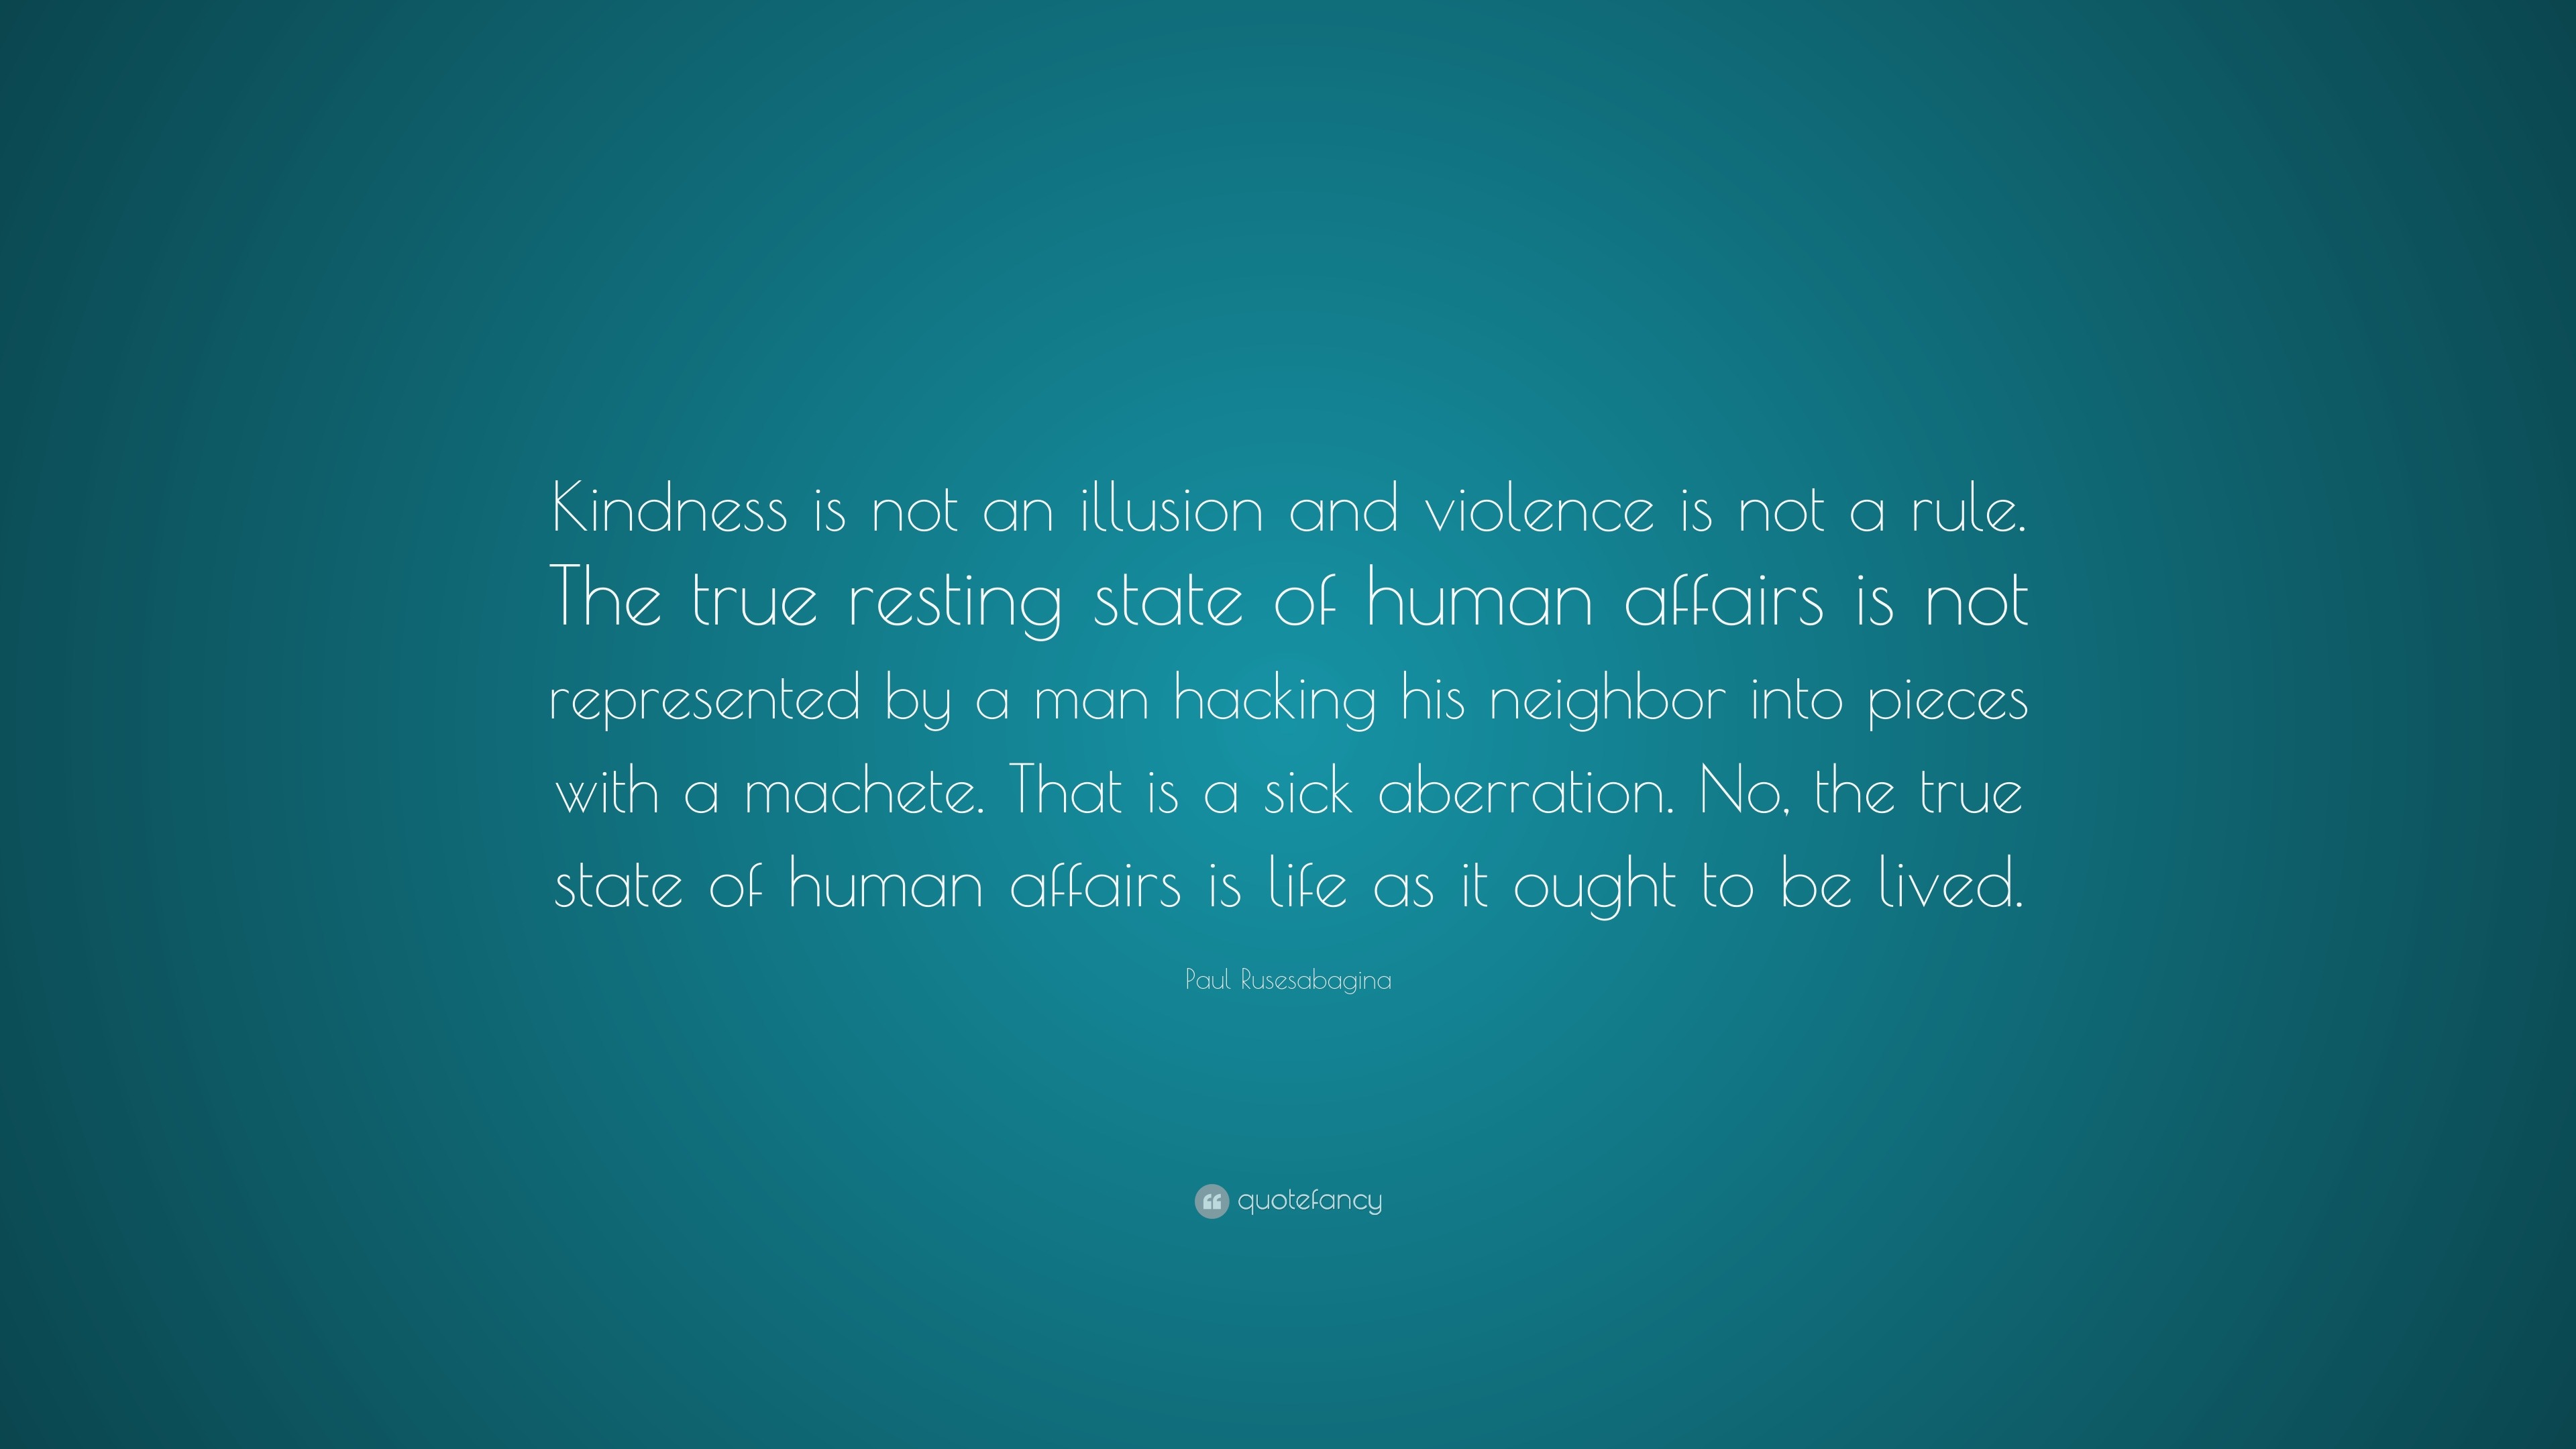 Paul Rusesabagina Quote: “Kindness is not an illusion and violence is ...